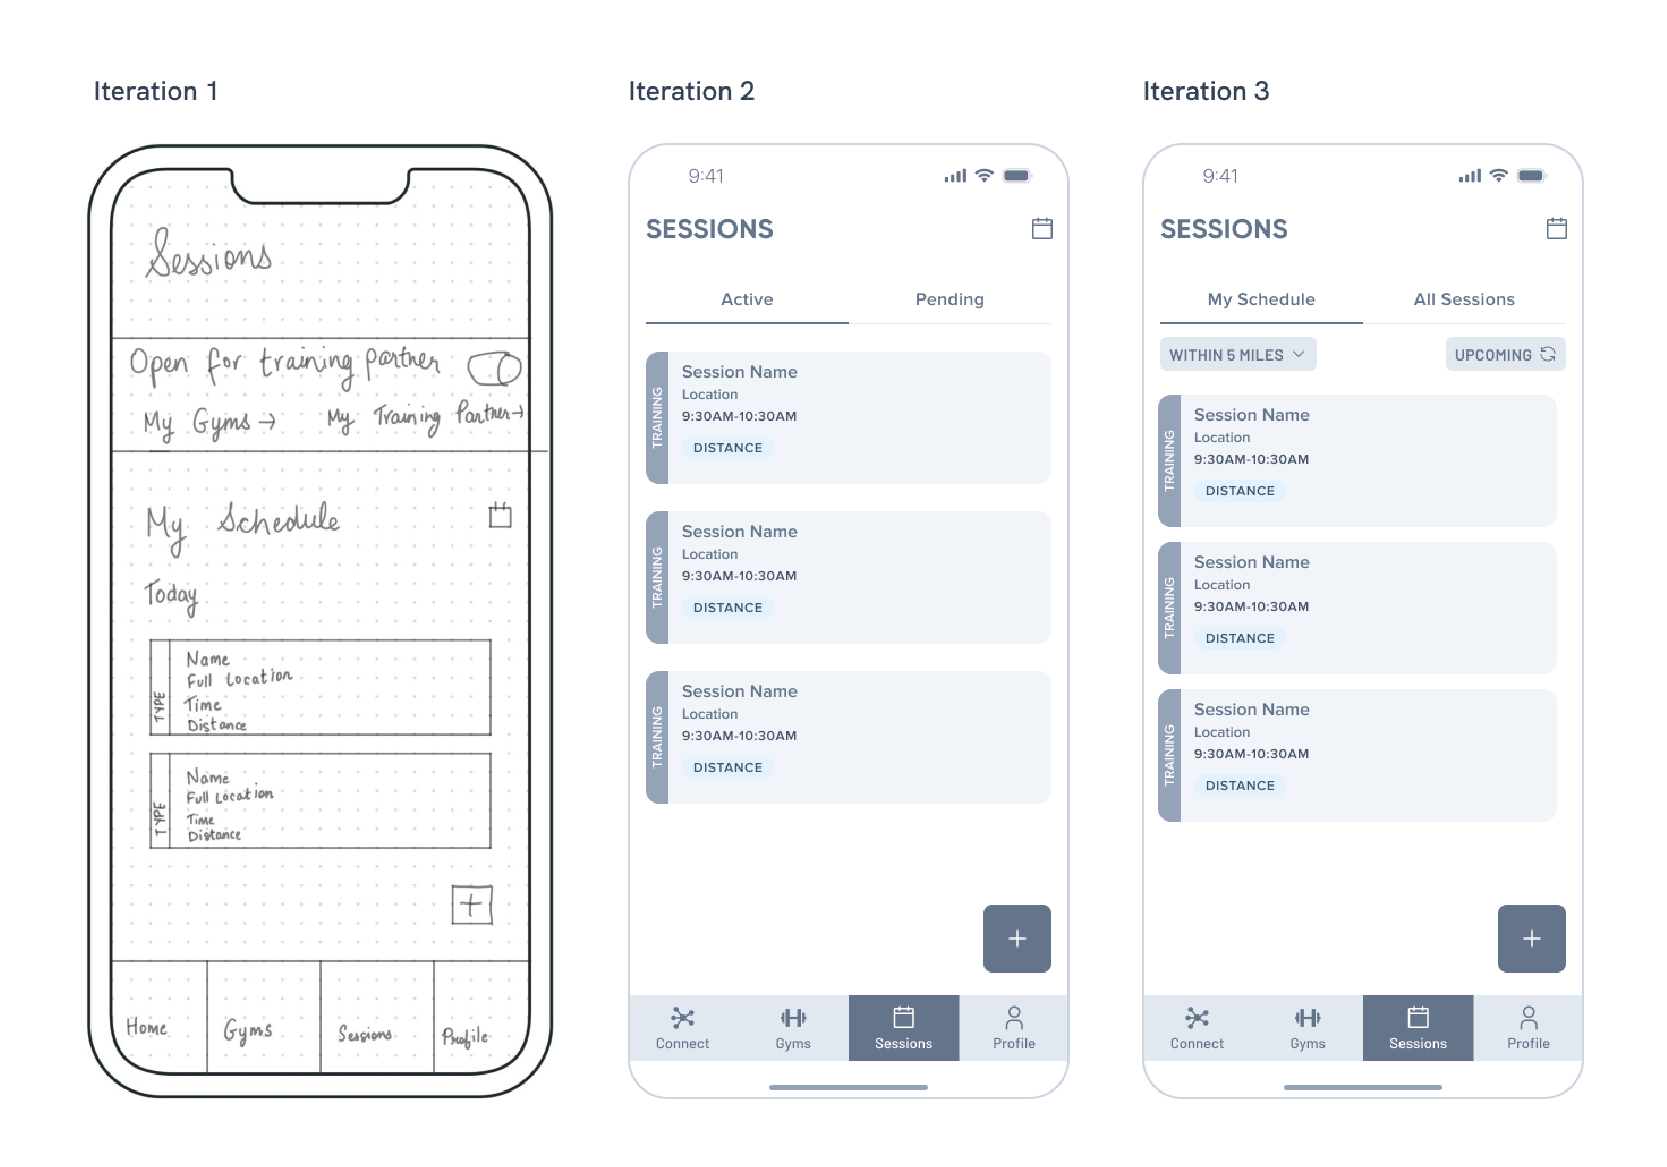 Three wireframes of screen of sportslink a mobile app, each for different iteration